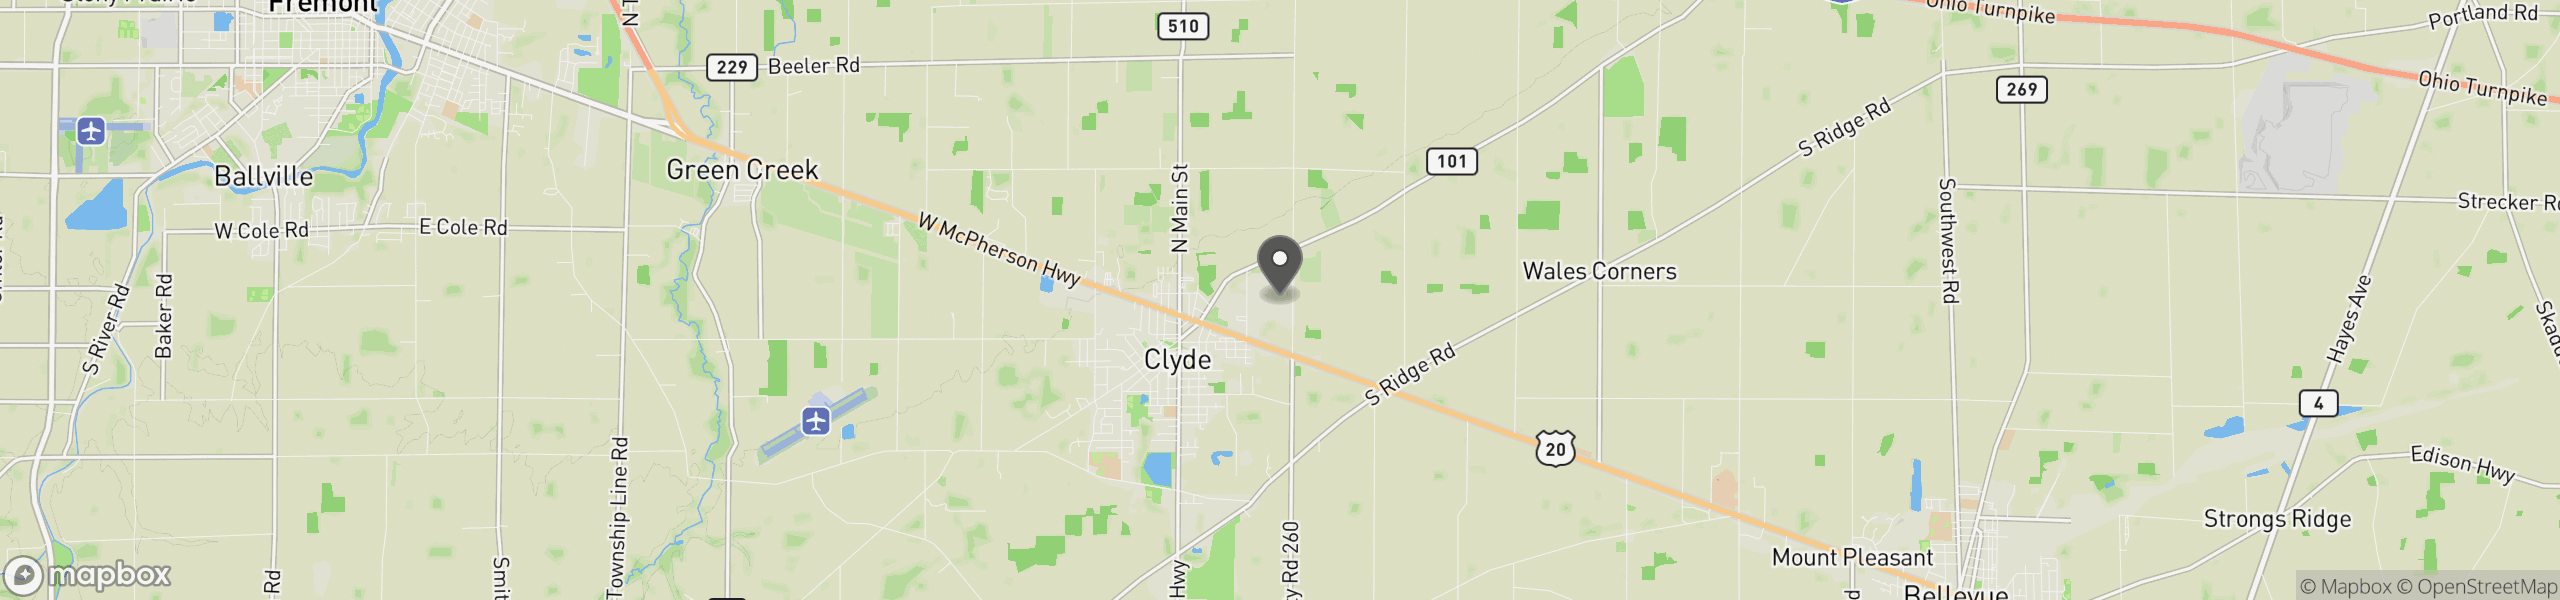 Clyde, OH 43410